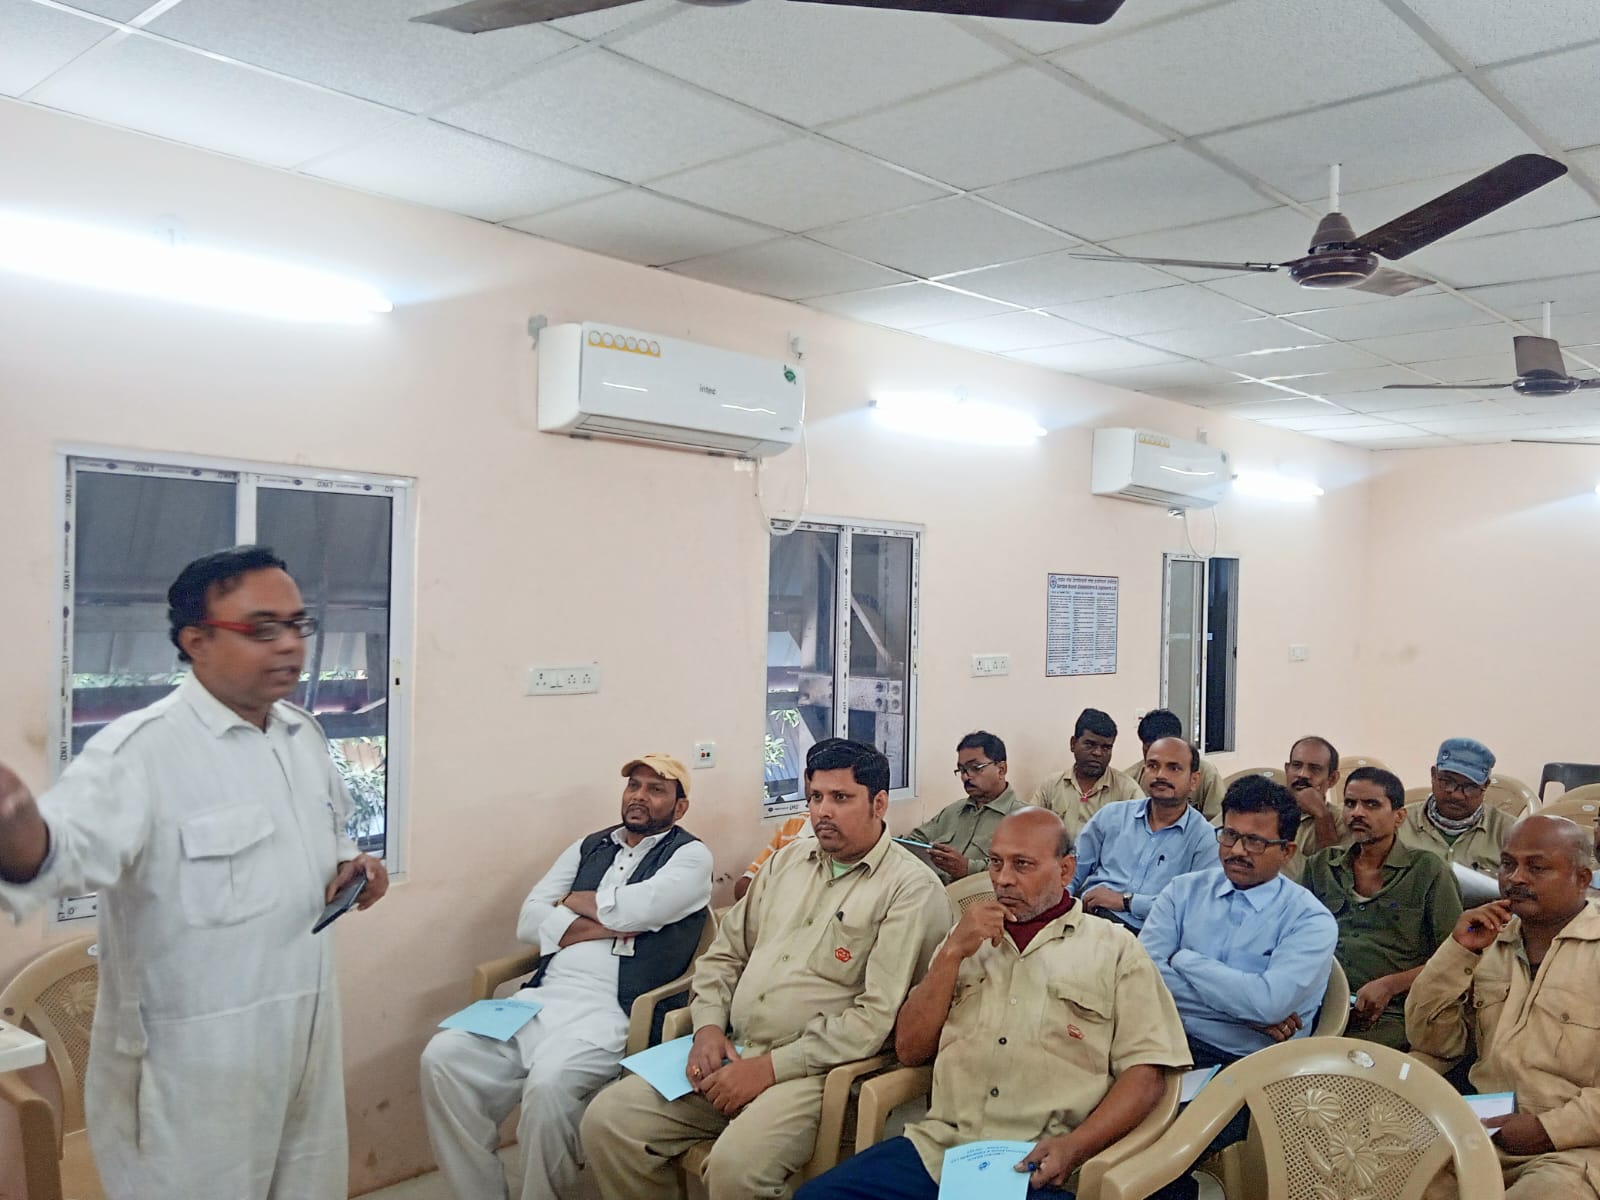 Safety training session through GSTK for Employees at Main Works on 08 Dec 23